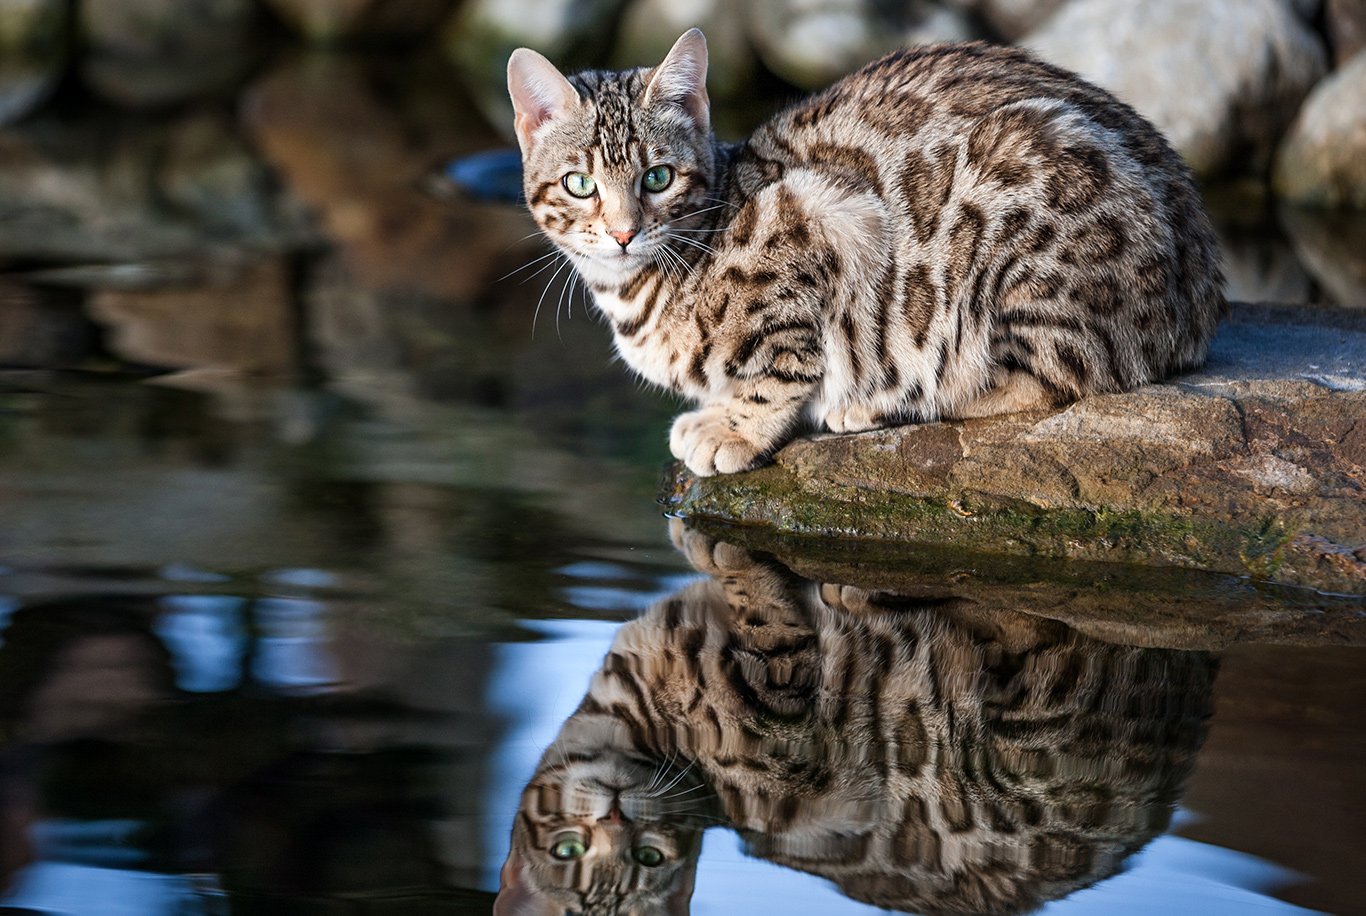 Kyst Hals skære ned Find the right food for a Bengal cat